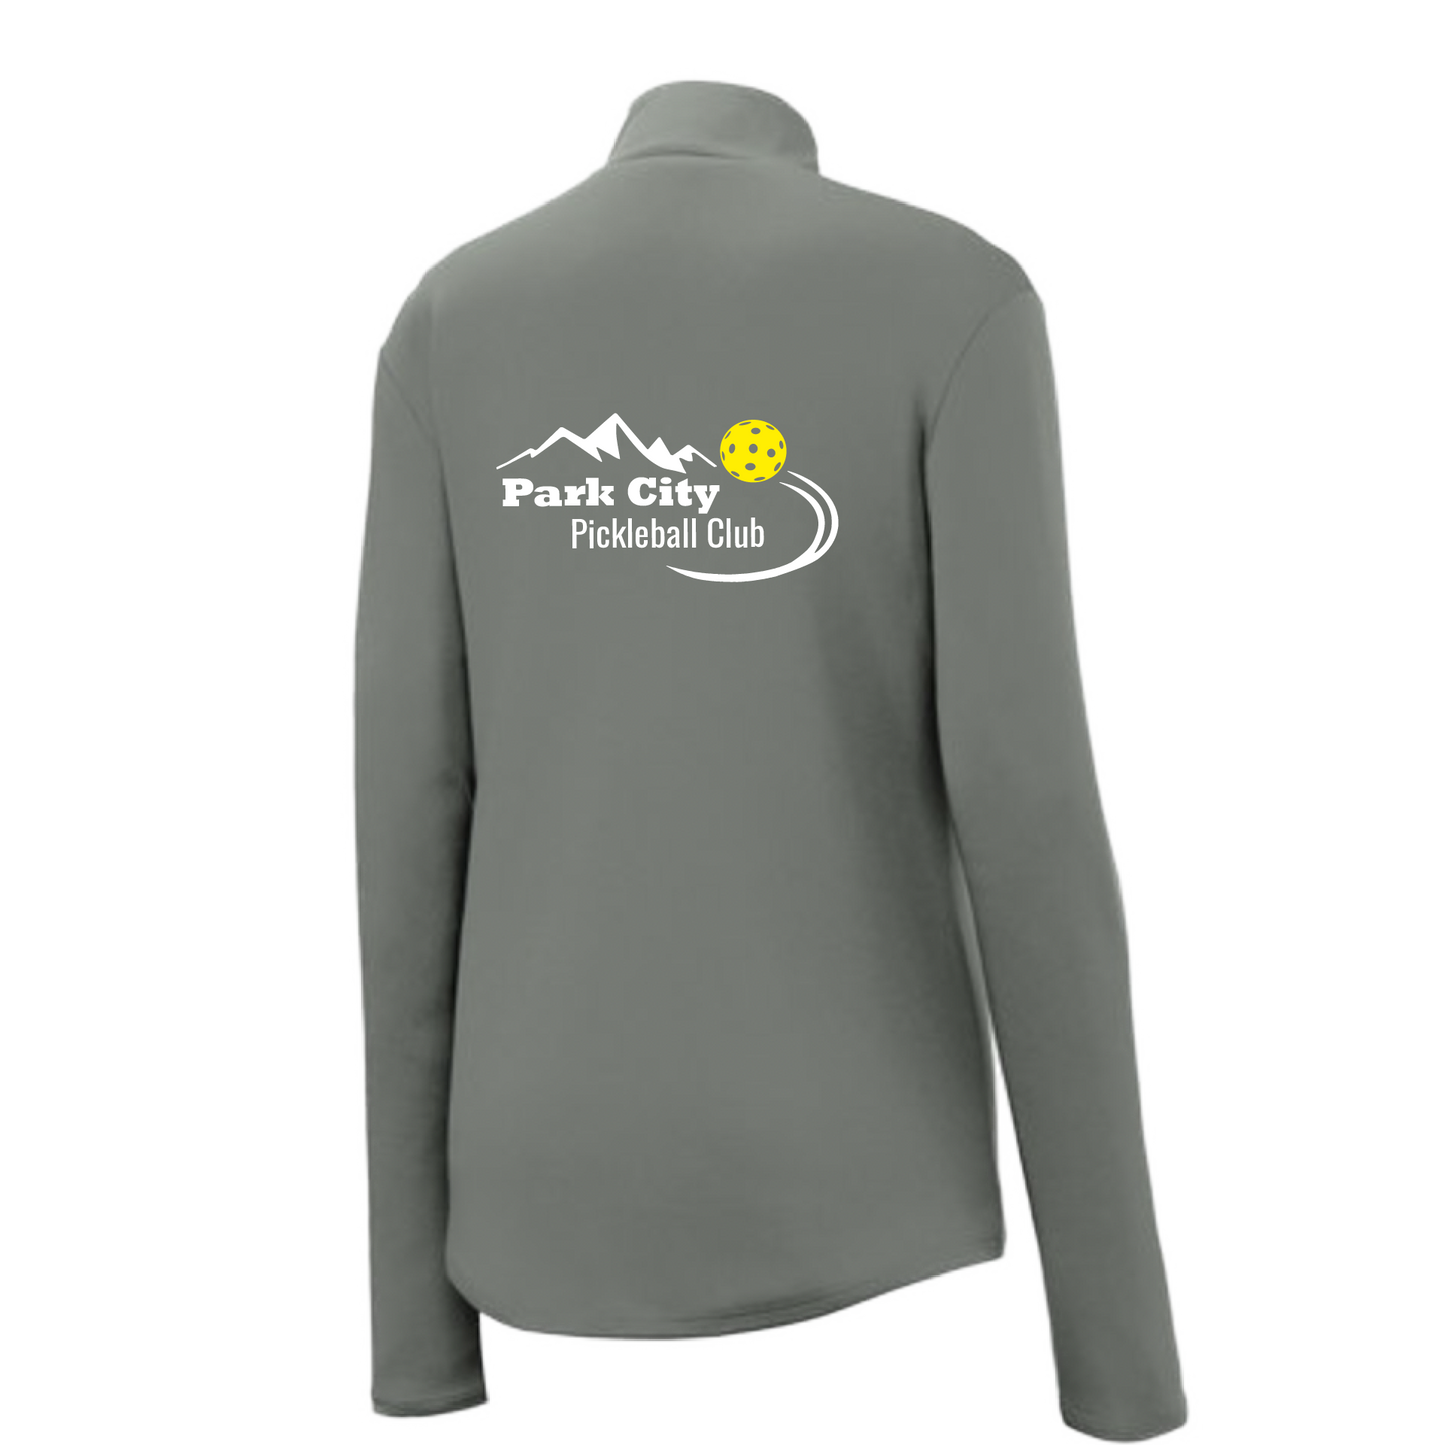 Pickleball Design: Park City Pickleball Club (white words)  Women's 1/4-Zip Pullover: Princess seams and Drop tail hem.  Turn up the volume in this Women's shirt with its perfect mix of softness and attitude. Material is ultra-comfortable with moisture wicking properties and tri-blend softness. PosiCharge technology locks in color. Highly breathable and lightweight. Versatile enough for wearing year-round.